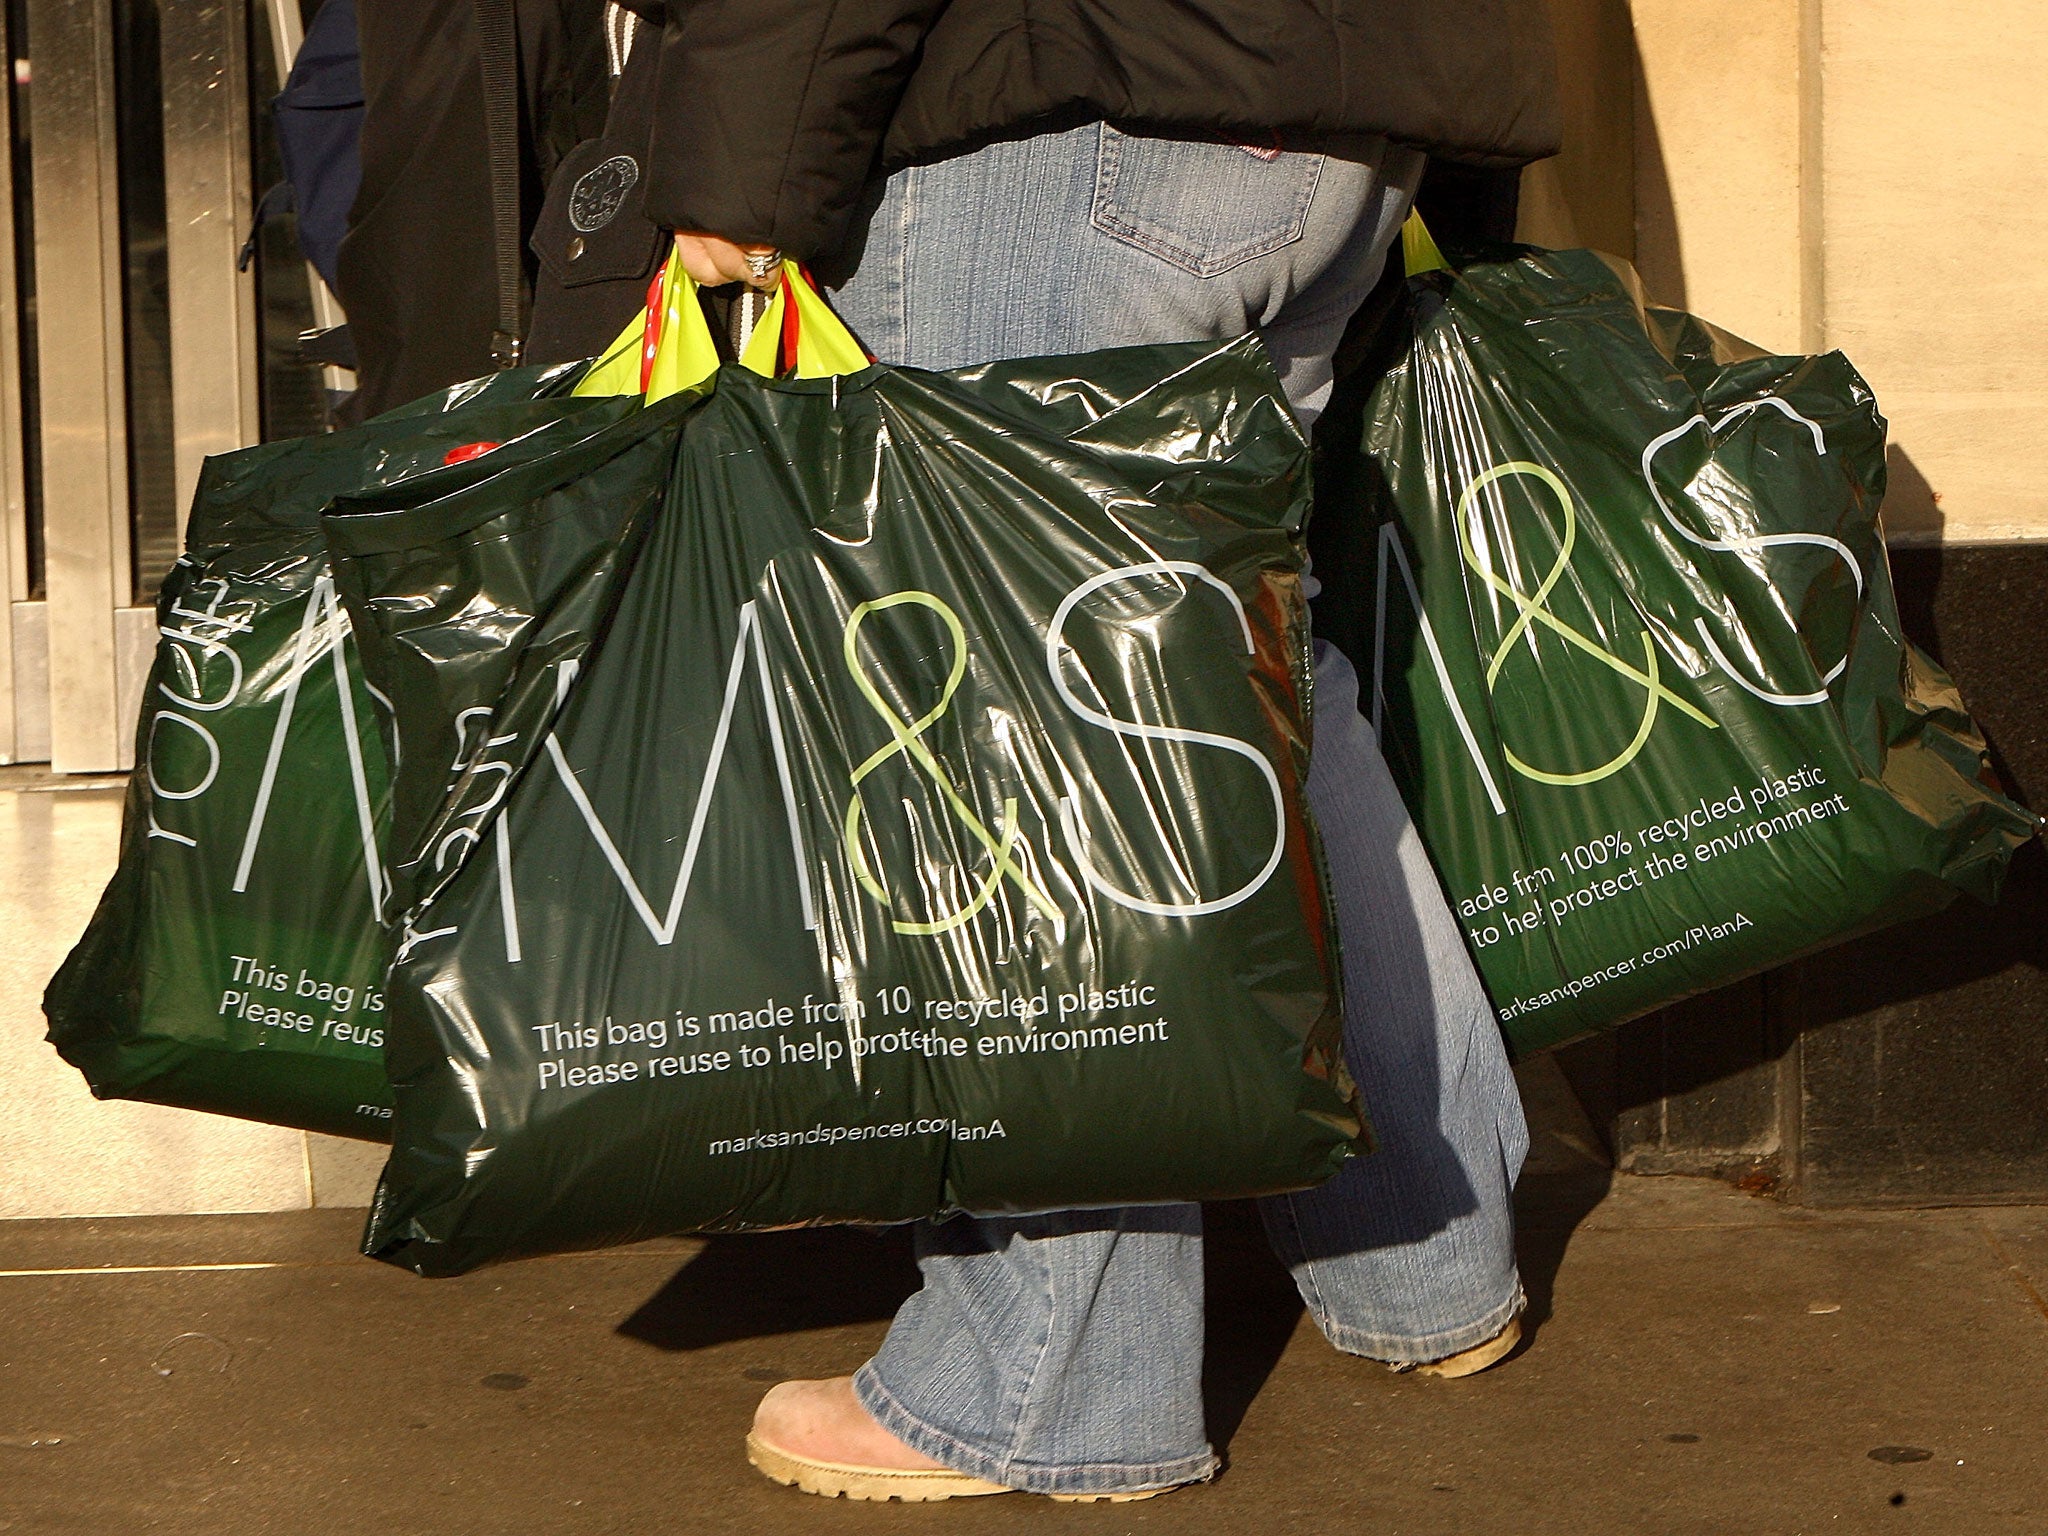 The man, who has not been named, was struck by a trolley while in an M&S store